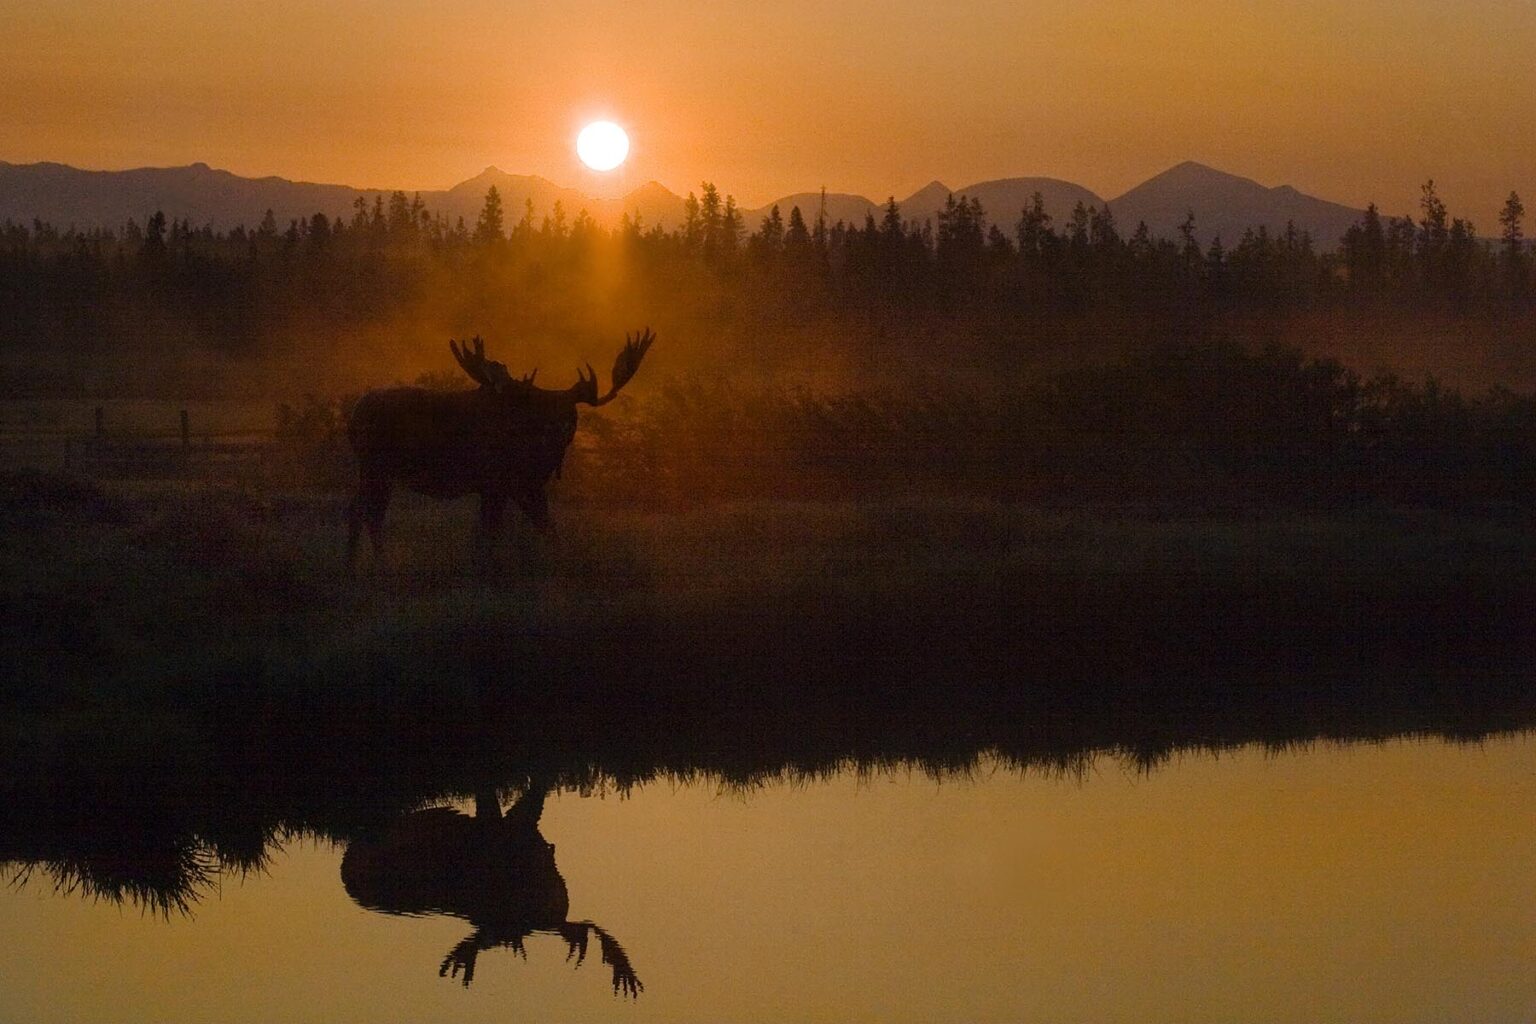 A MOOSE (Alces alces) on the bank of the YELLOWSTONE RIVER at sunrise - YELLOWSTONE NATIONAL PARK, WYOMING